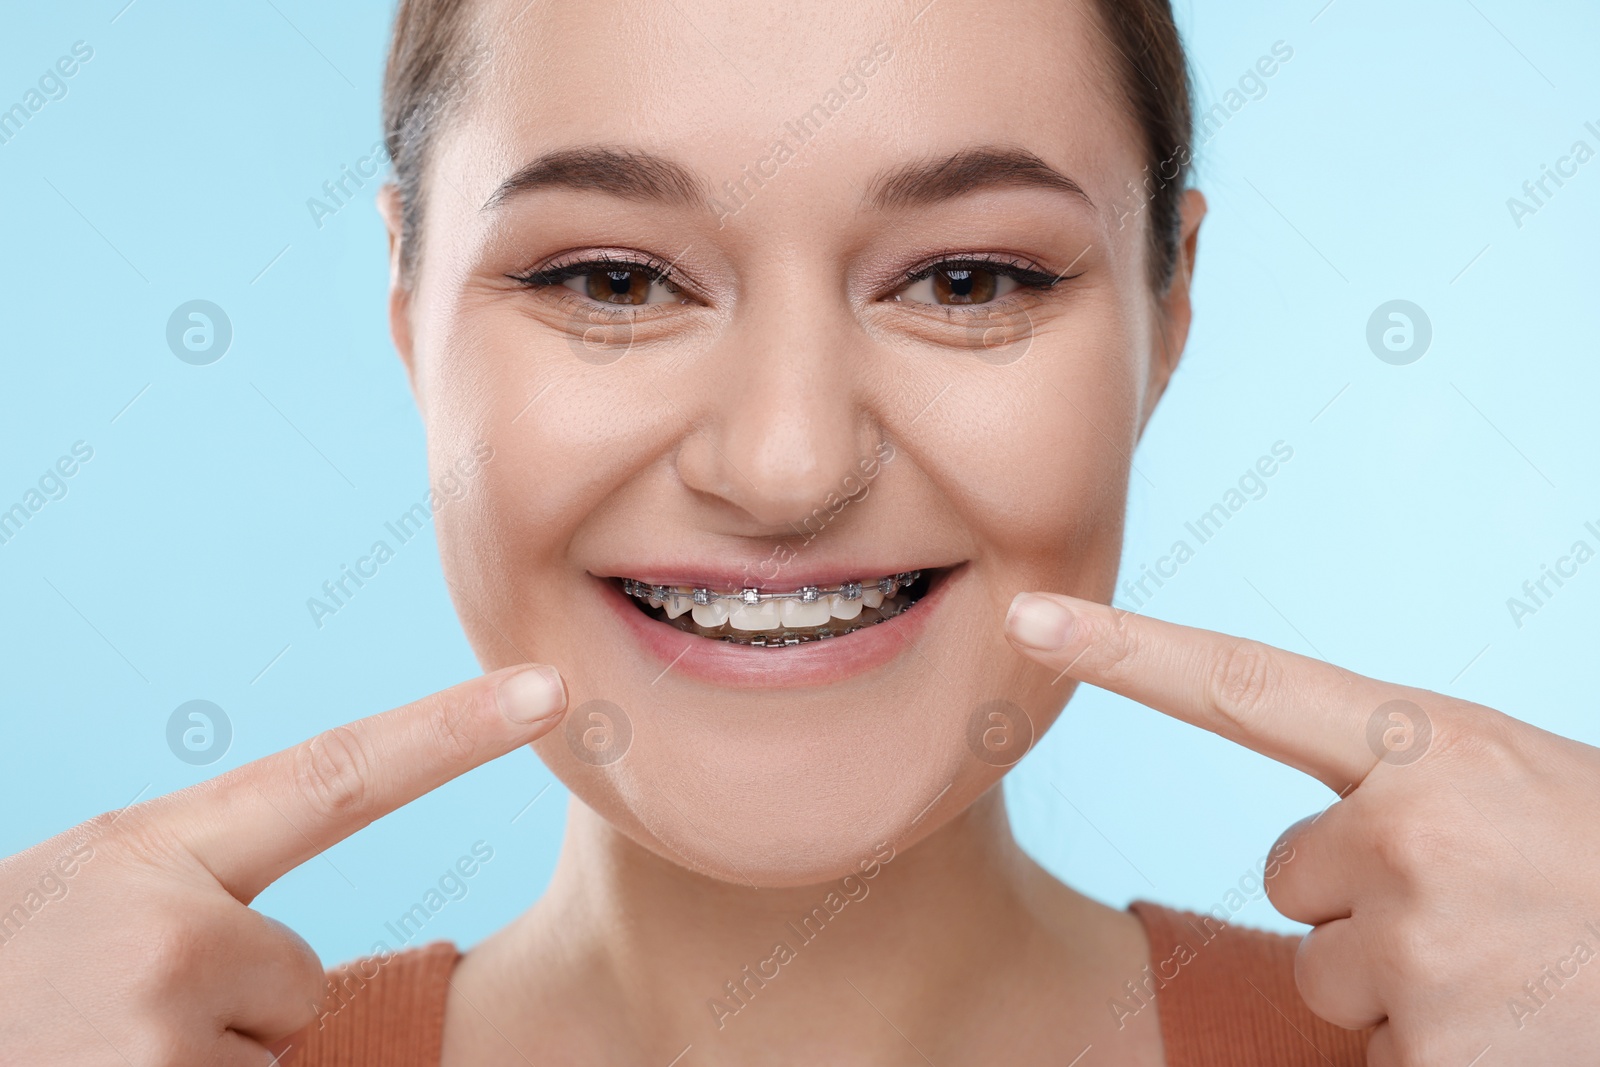 Photo of Smiling woman pointing at braces on her teeth against light blue background, closeup